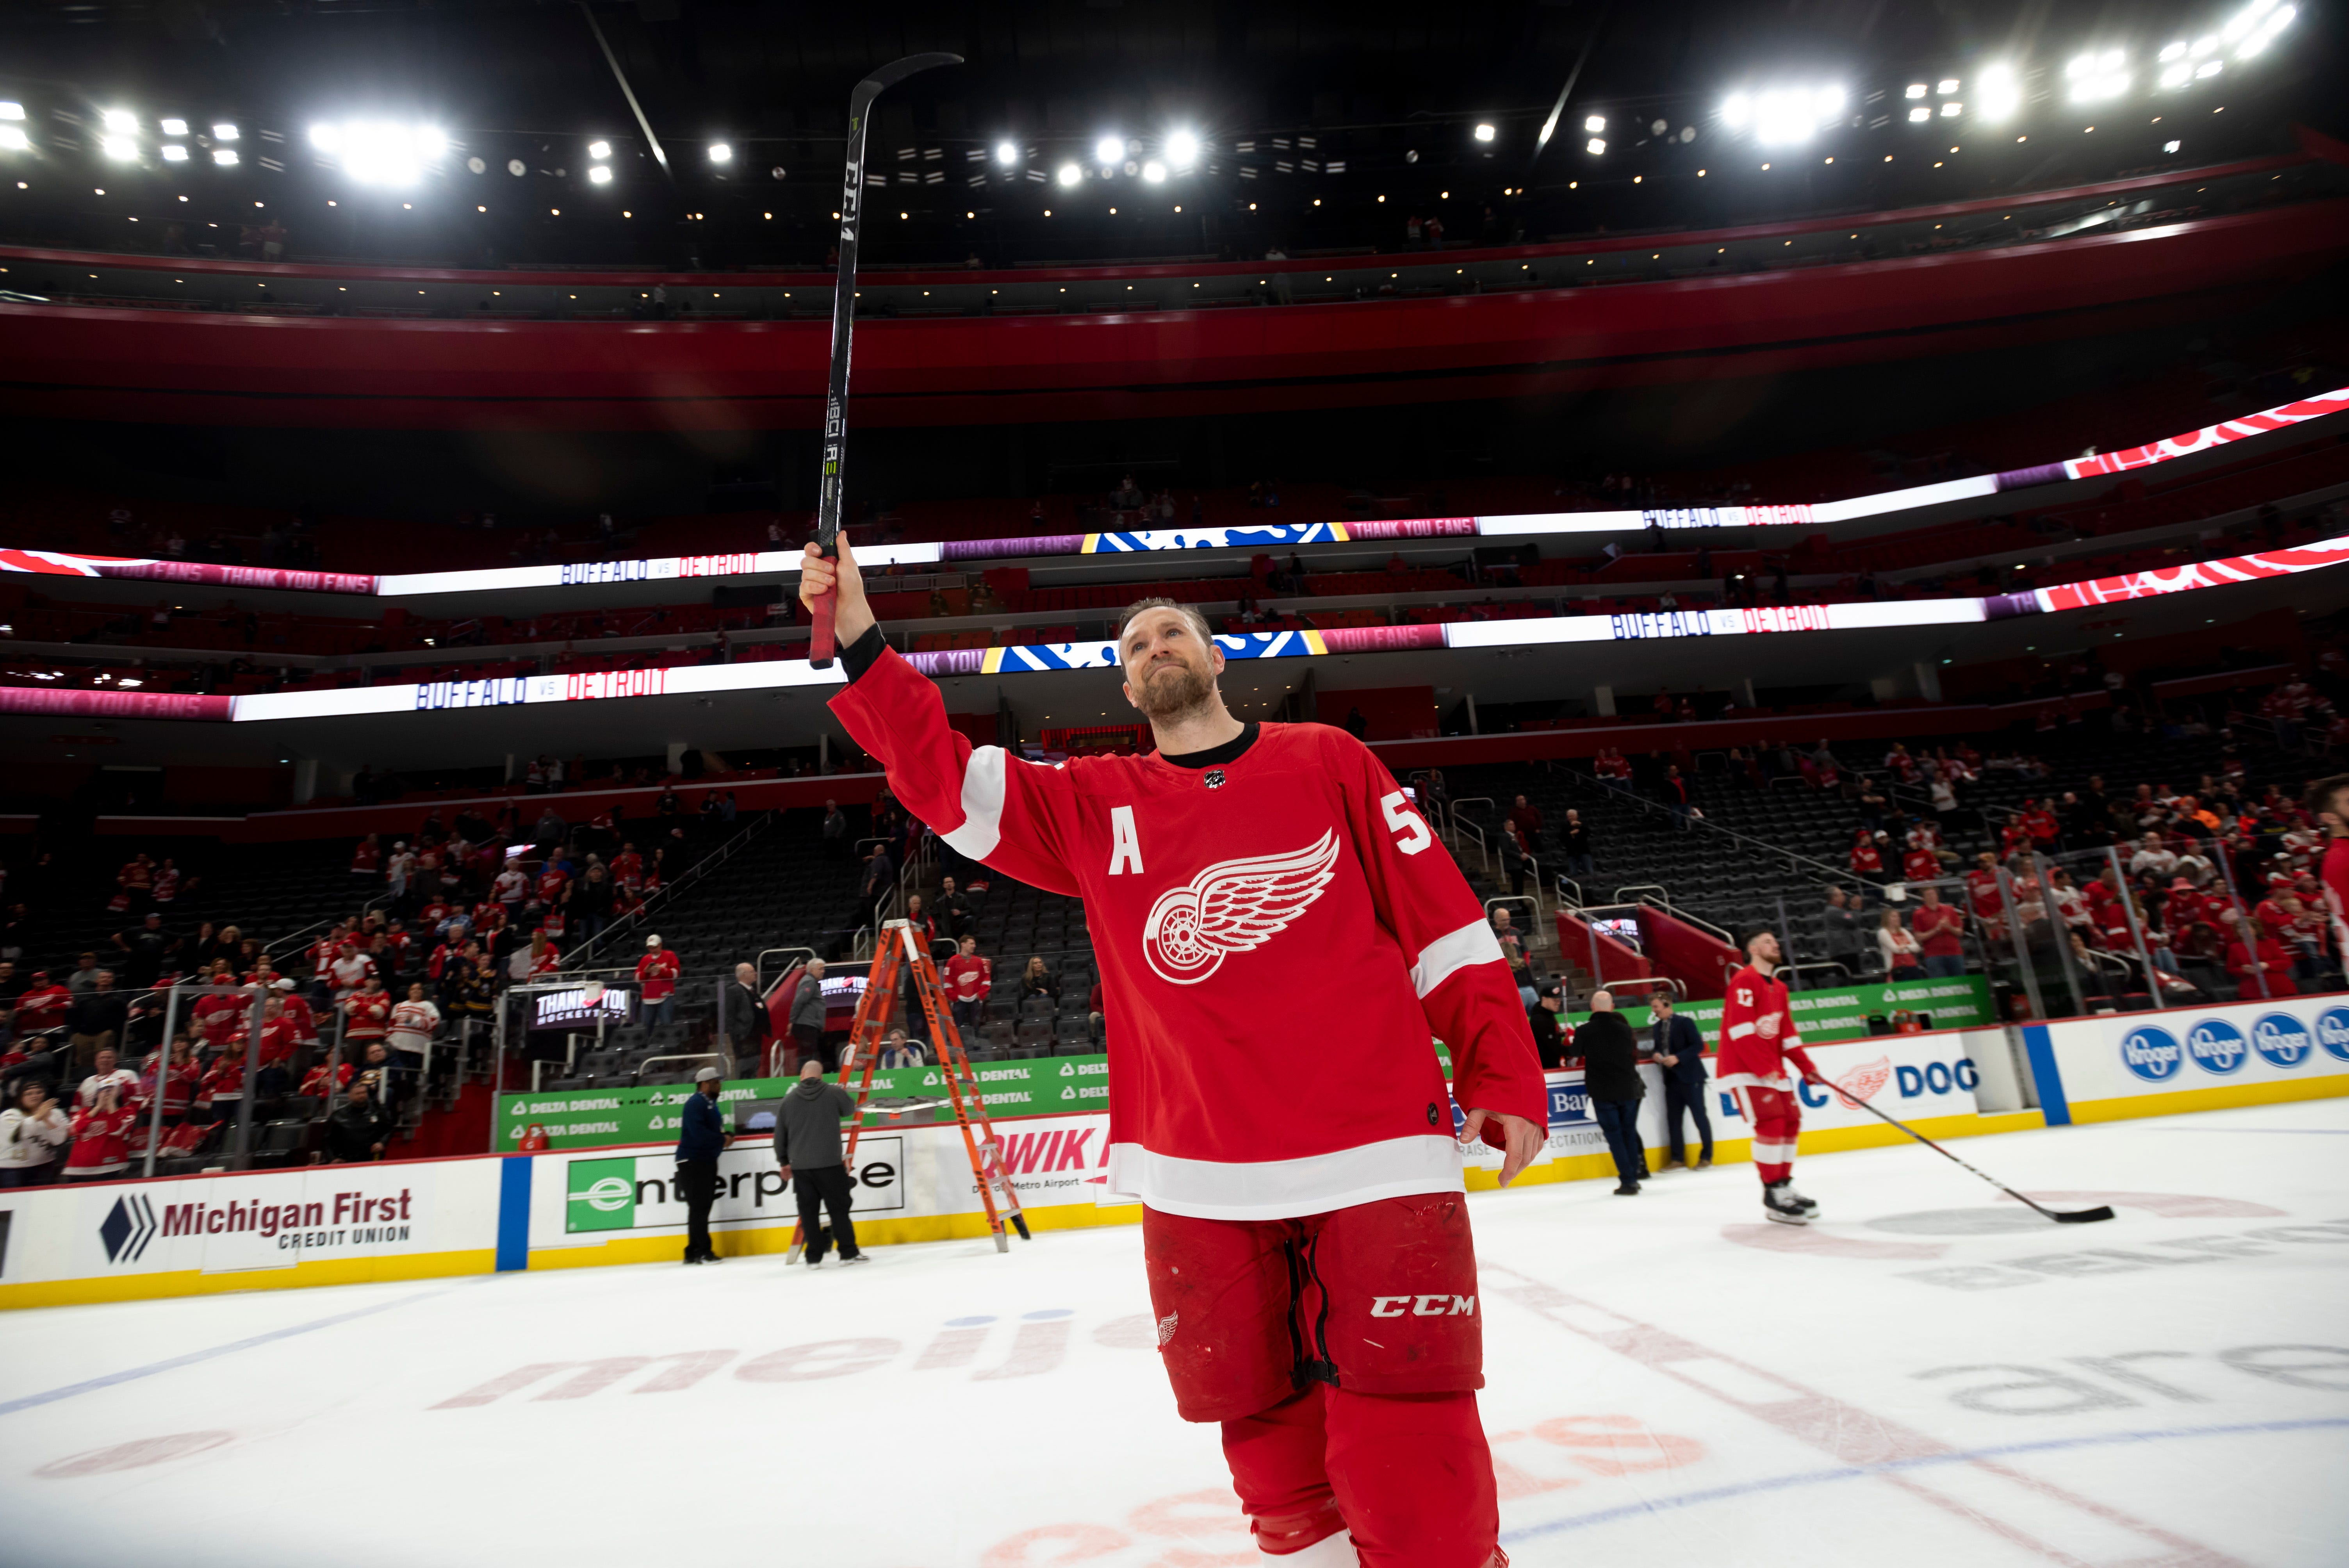 Detroit defenseman Niklas Kronwall waves to the fans after a game against the Buffalo Sabres at Little Caesars Arena in Detroit on April 6, 2019. Kronwall announced he ' ll retire from the NHL after 15 hard-hitting seasons with the Red Wings.